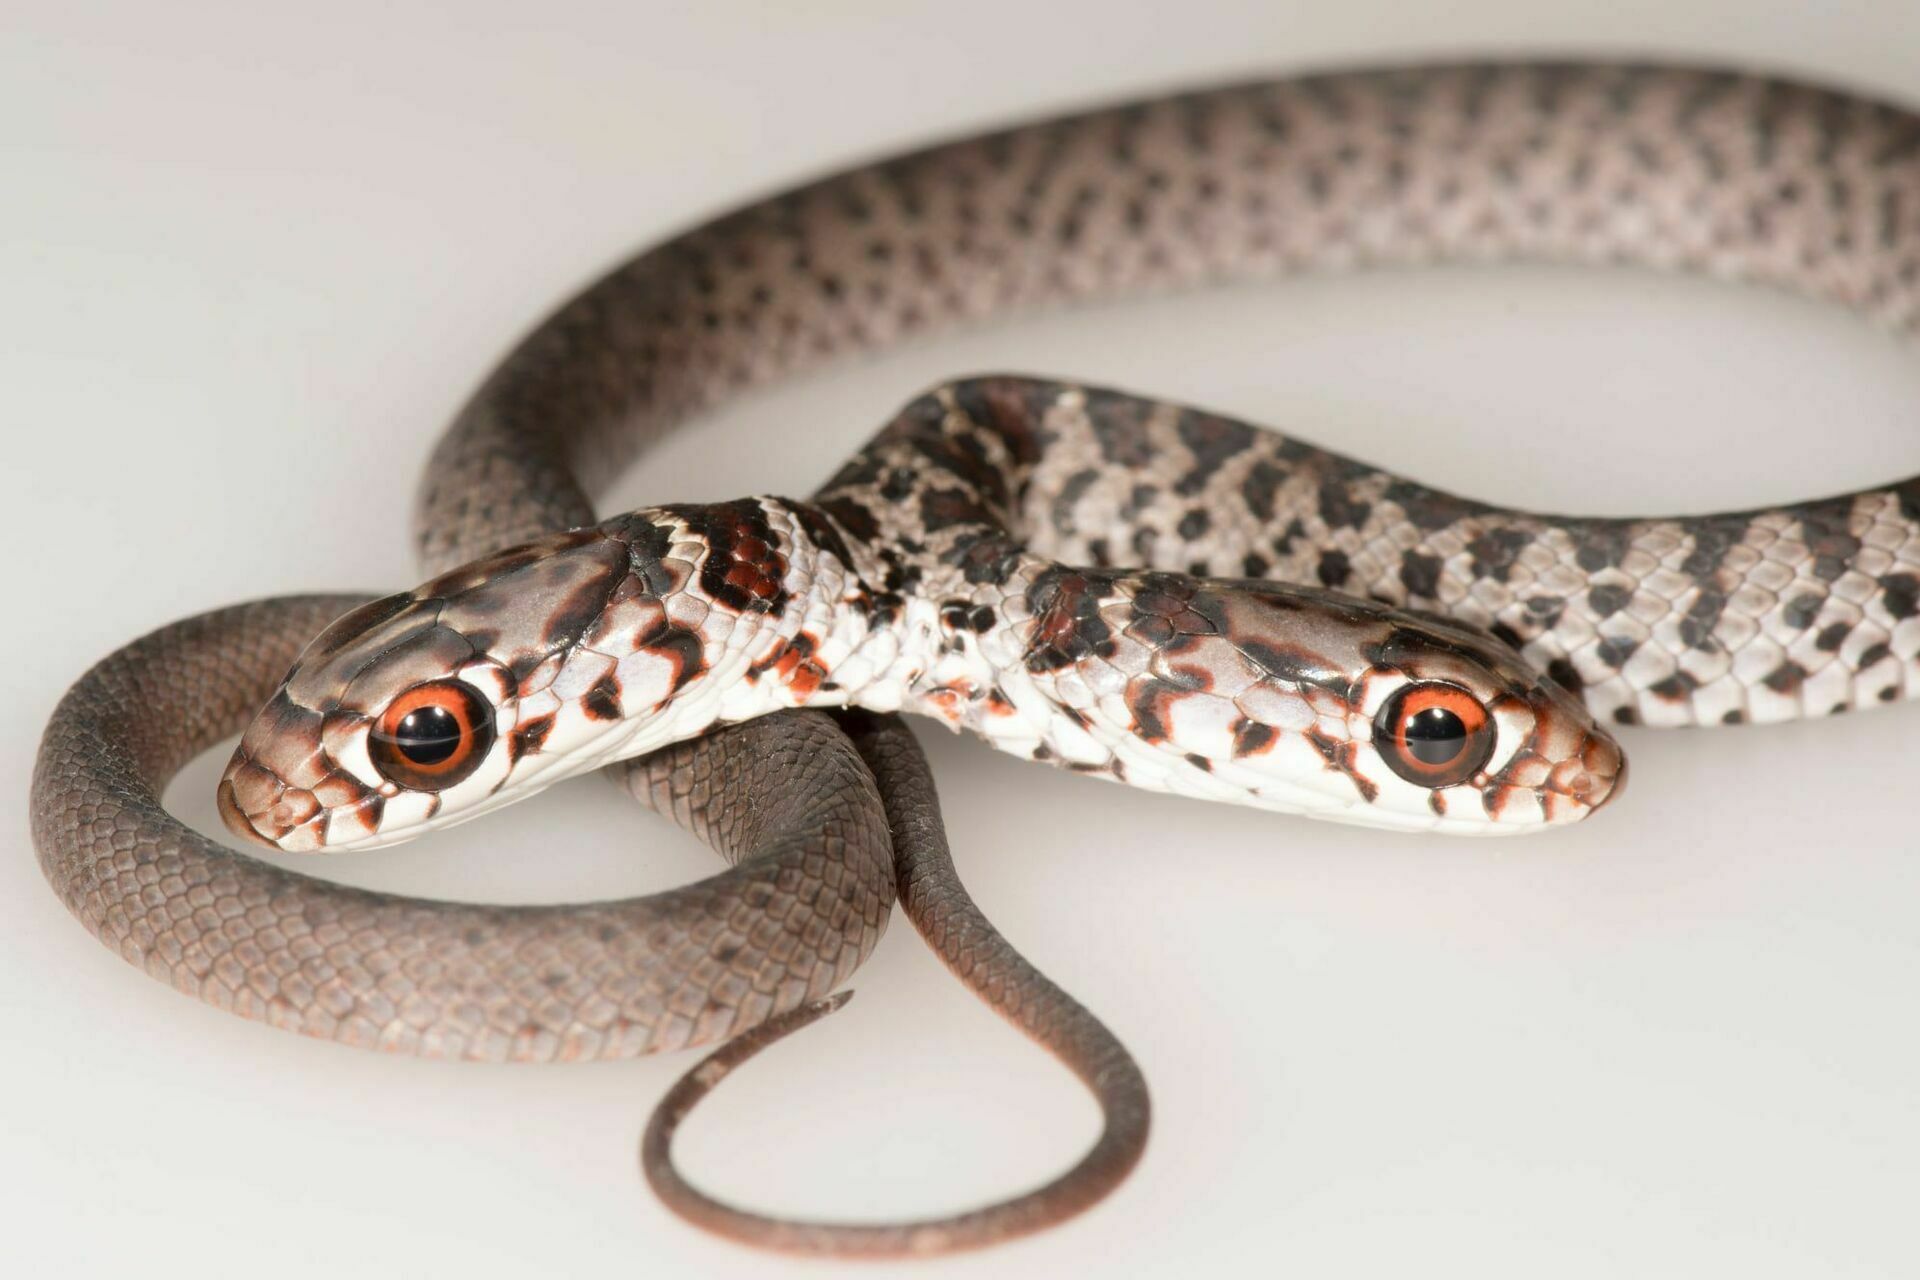 Two mouths for one stomach: a two-headed snake is found in Florida